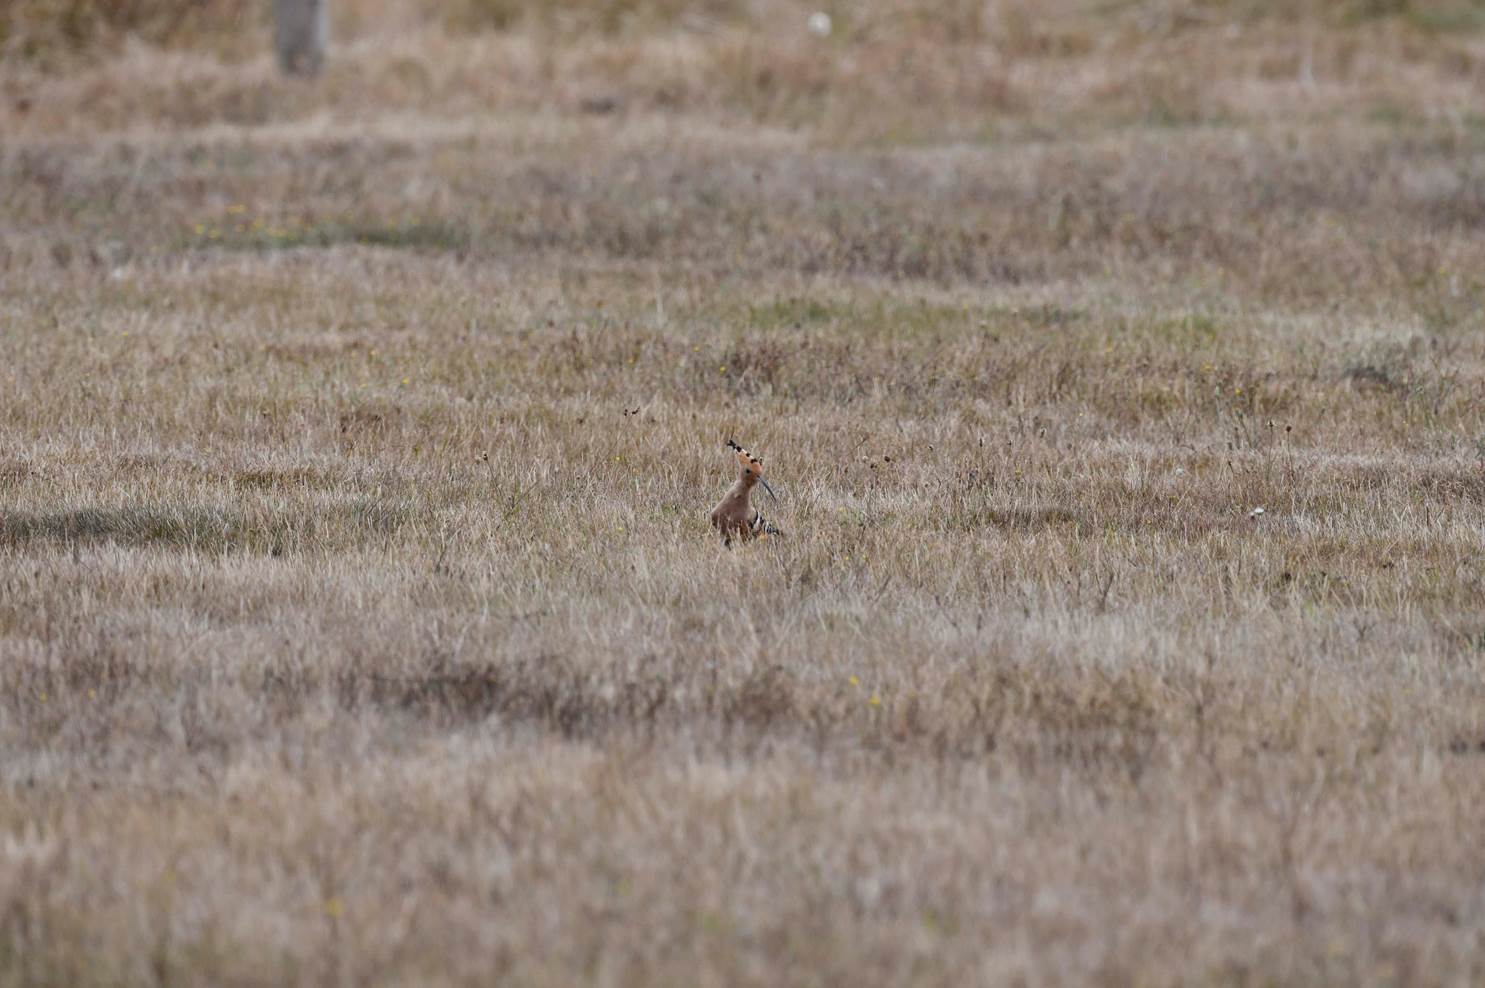 A rabbit in a field

Description automatically generated